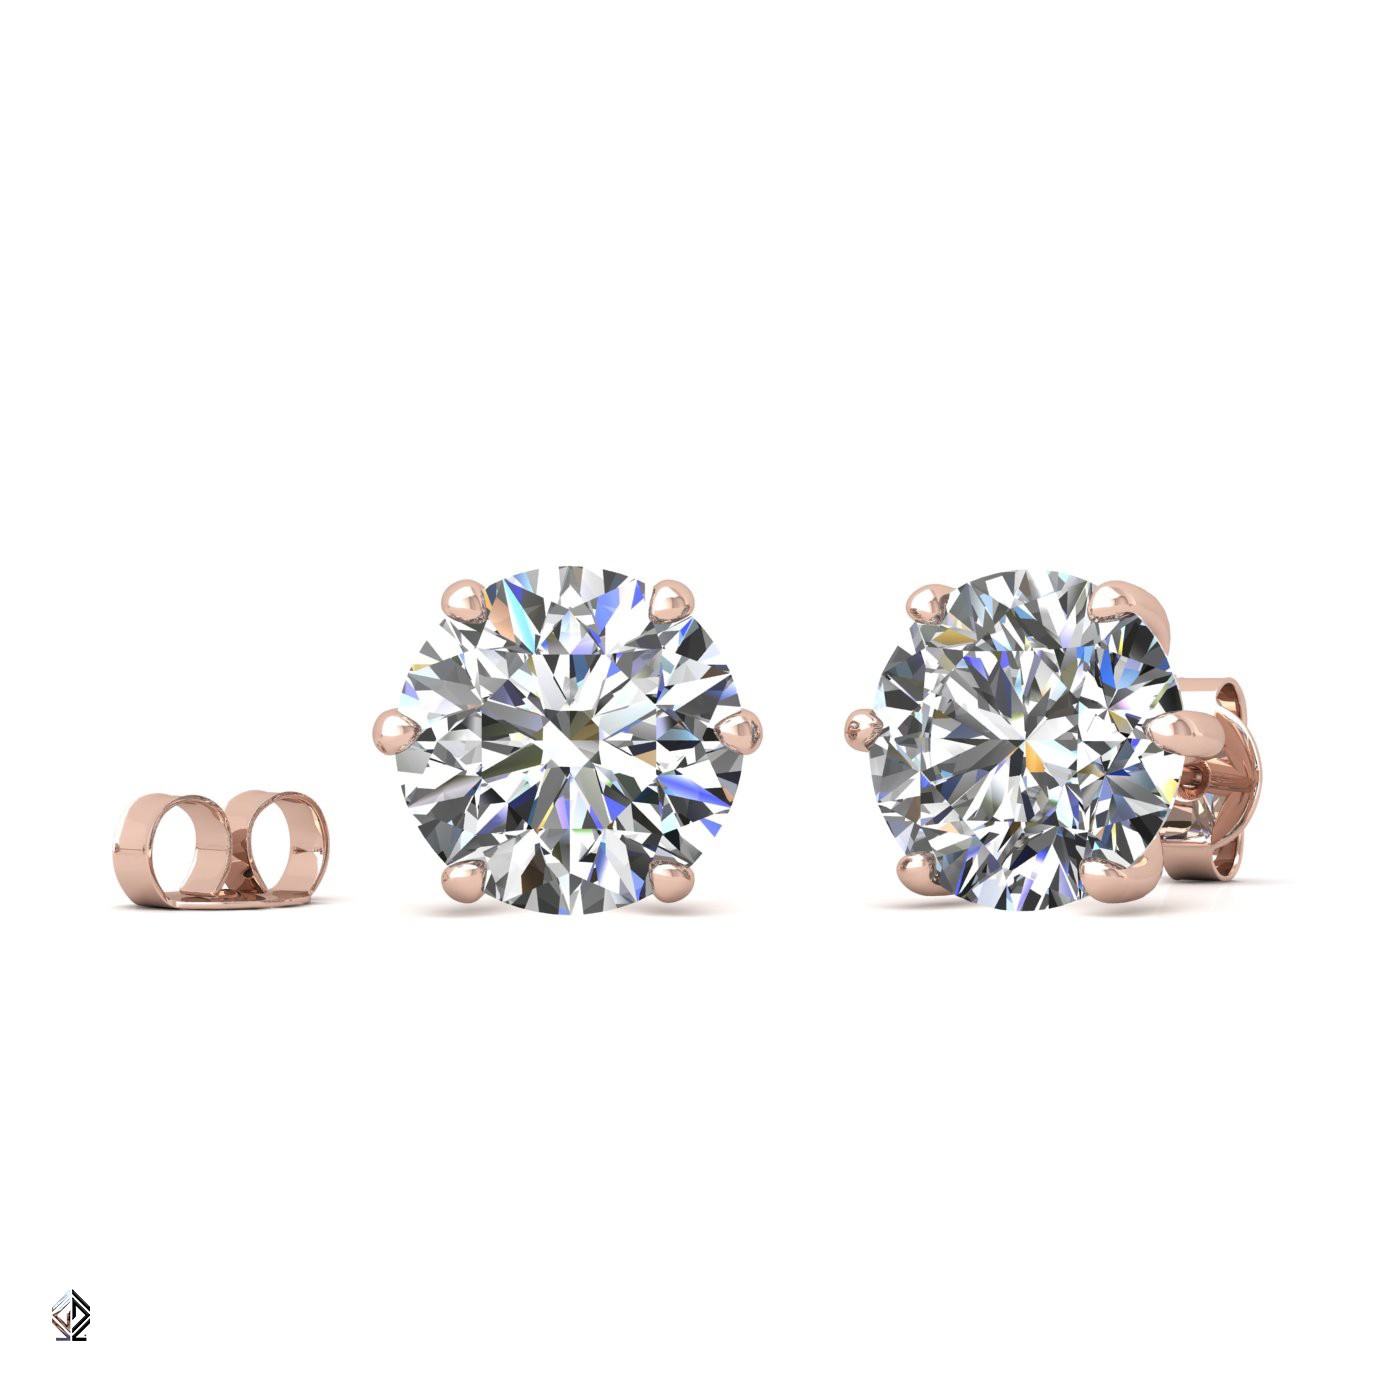 18k rose gold 2.5 ct each (5,0 tcw) 6 prongs round shape diamond earrings Photos & images